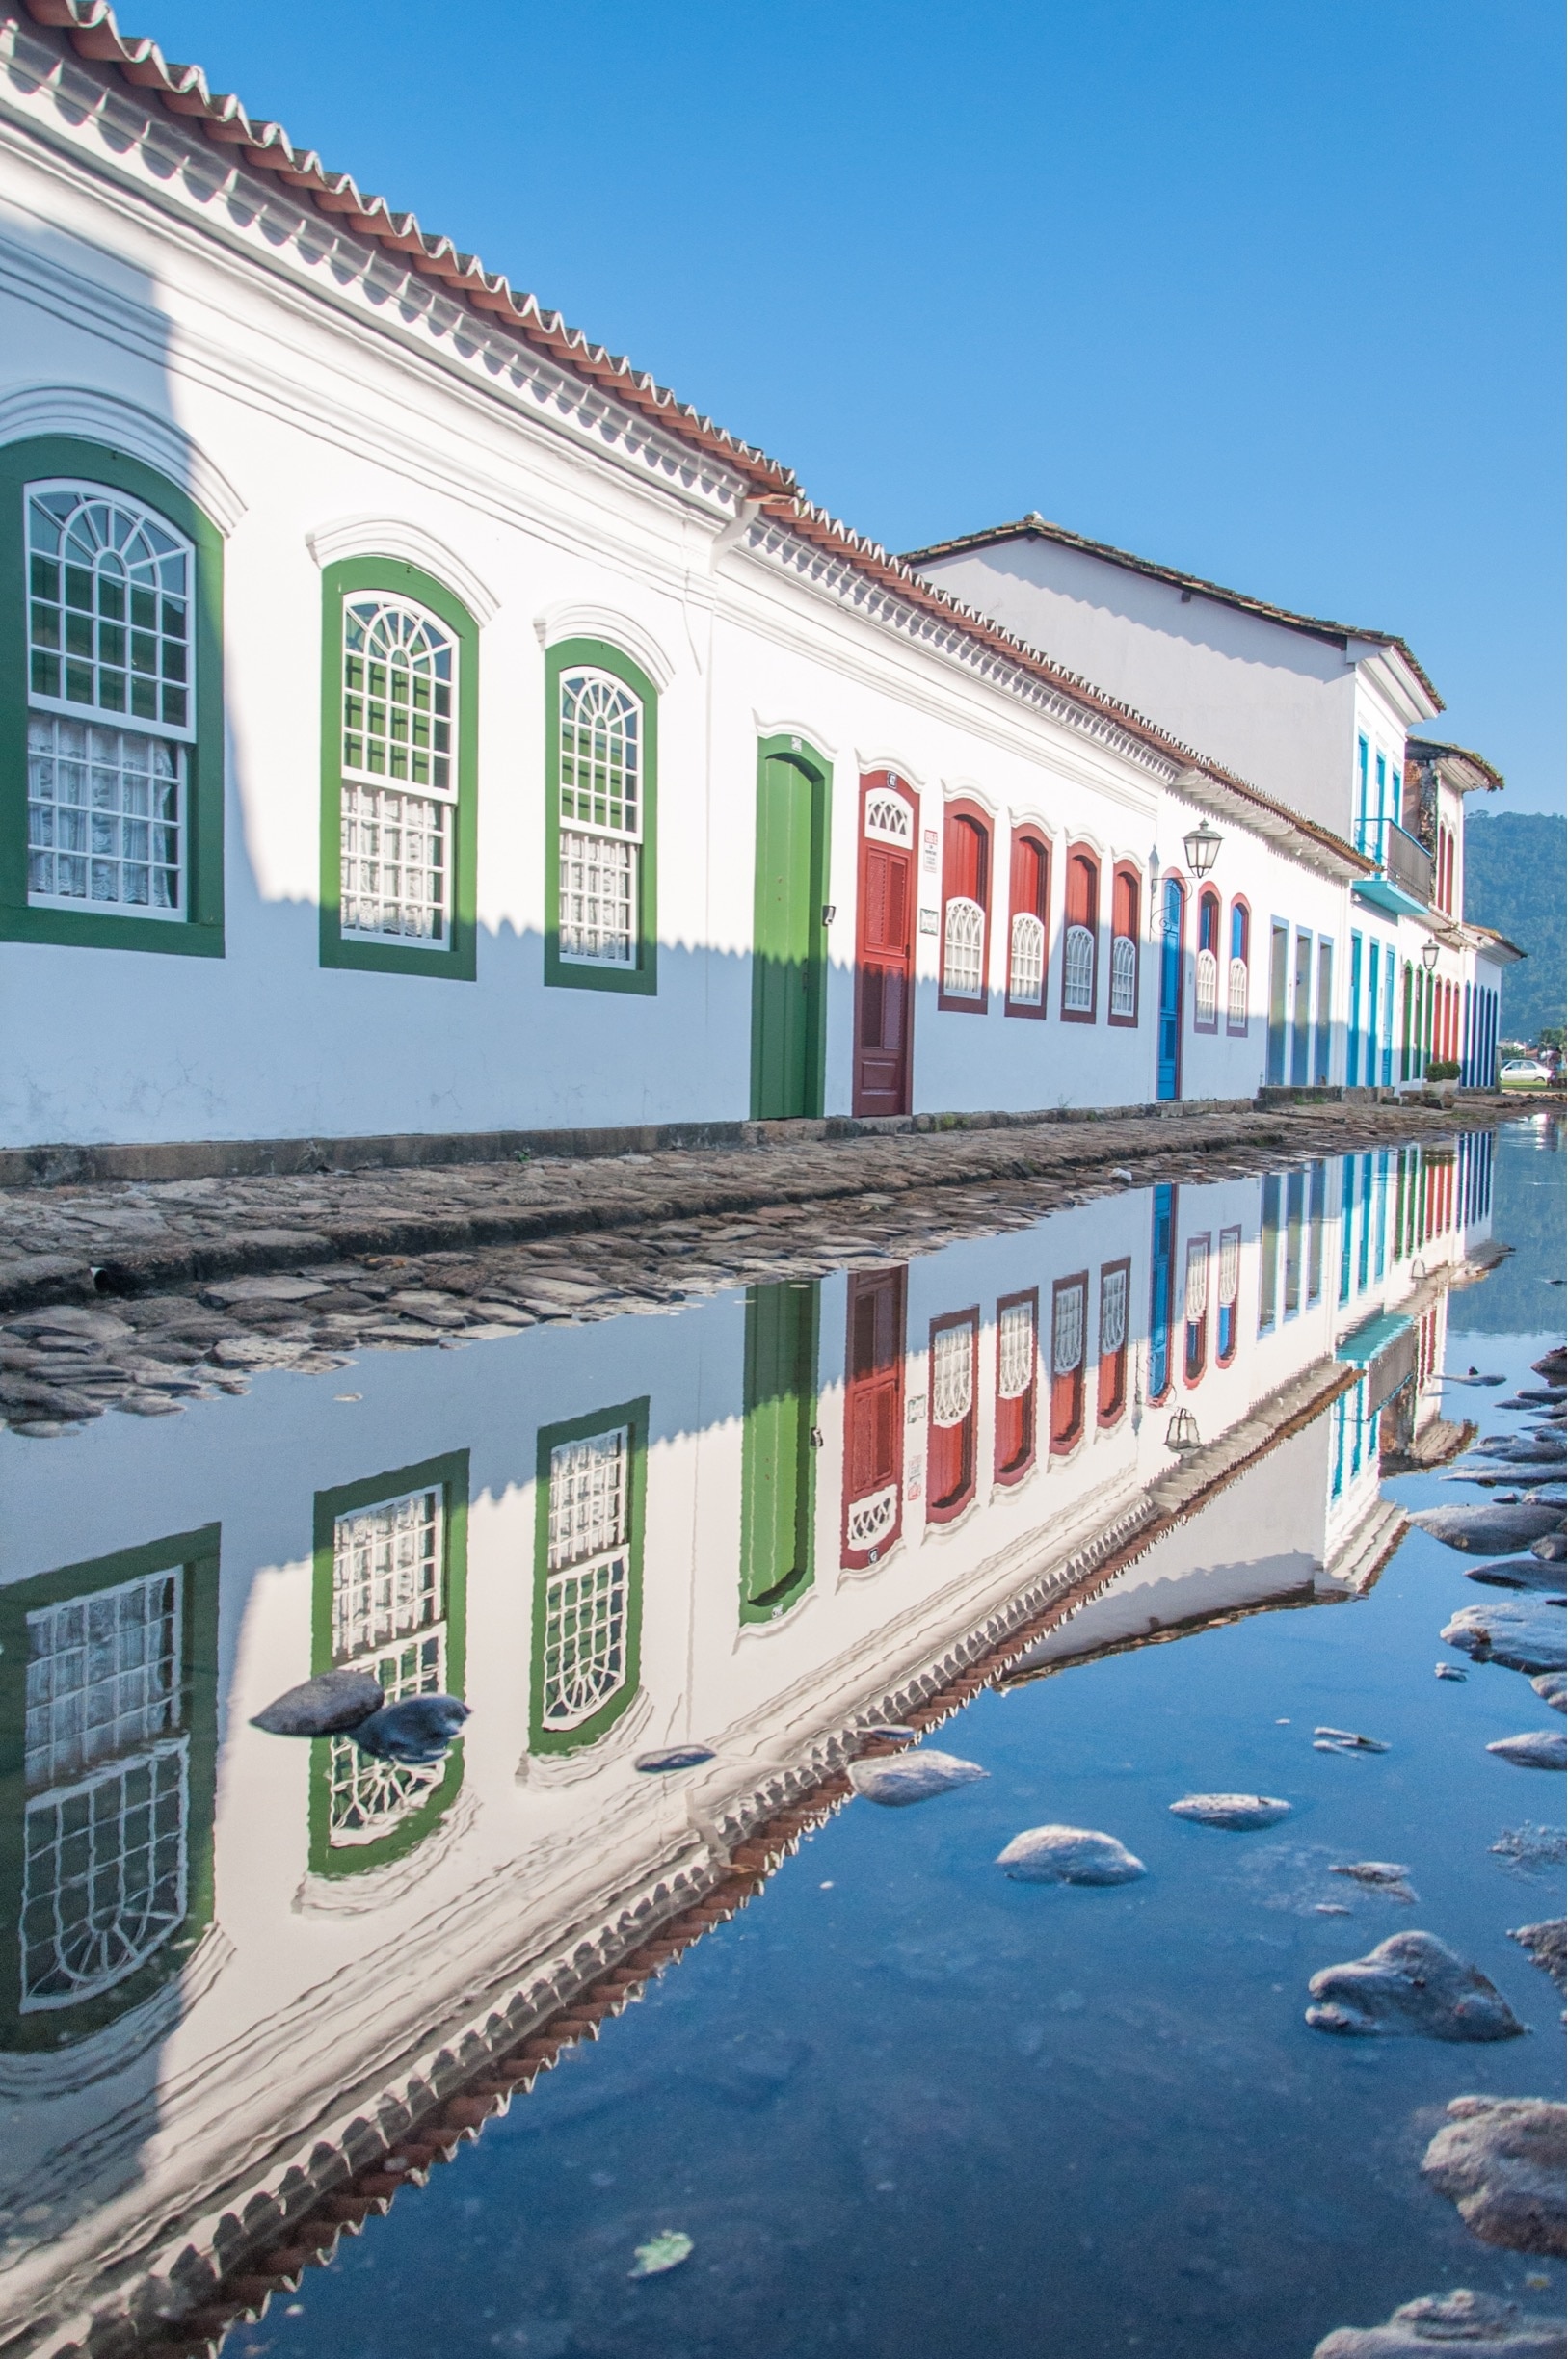 Paraty is a historic city that is 3 hours from the center of Rio de Janeiro, full of old buildings, beautiful beaches and islands, some waterfalls and good restaurants. To do this photo it took 3 days of observation of the full tide and lack of wind.